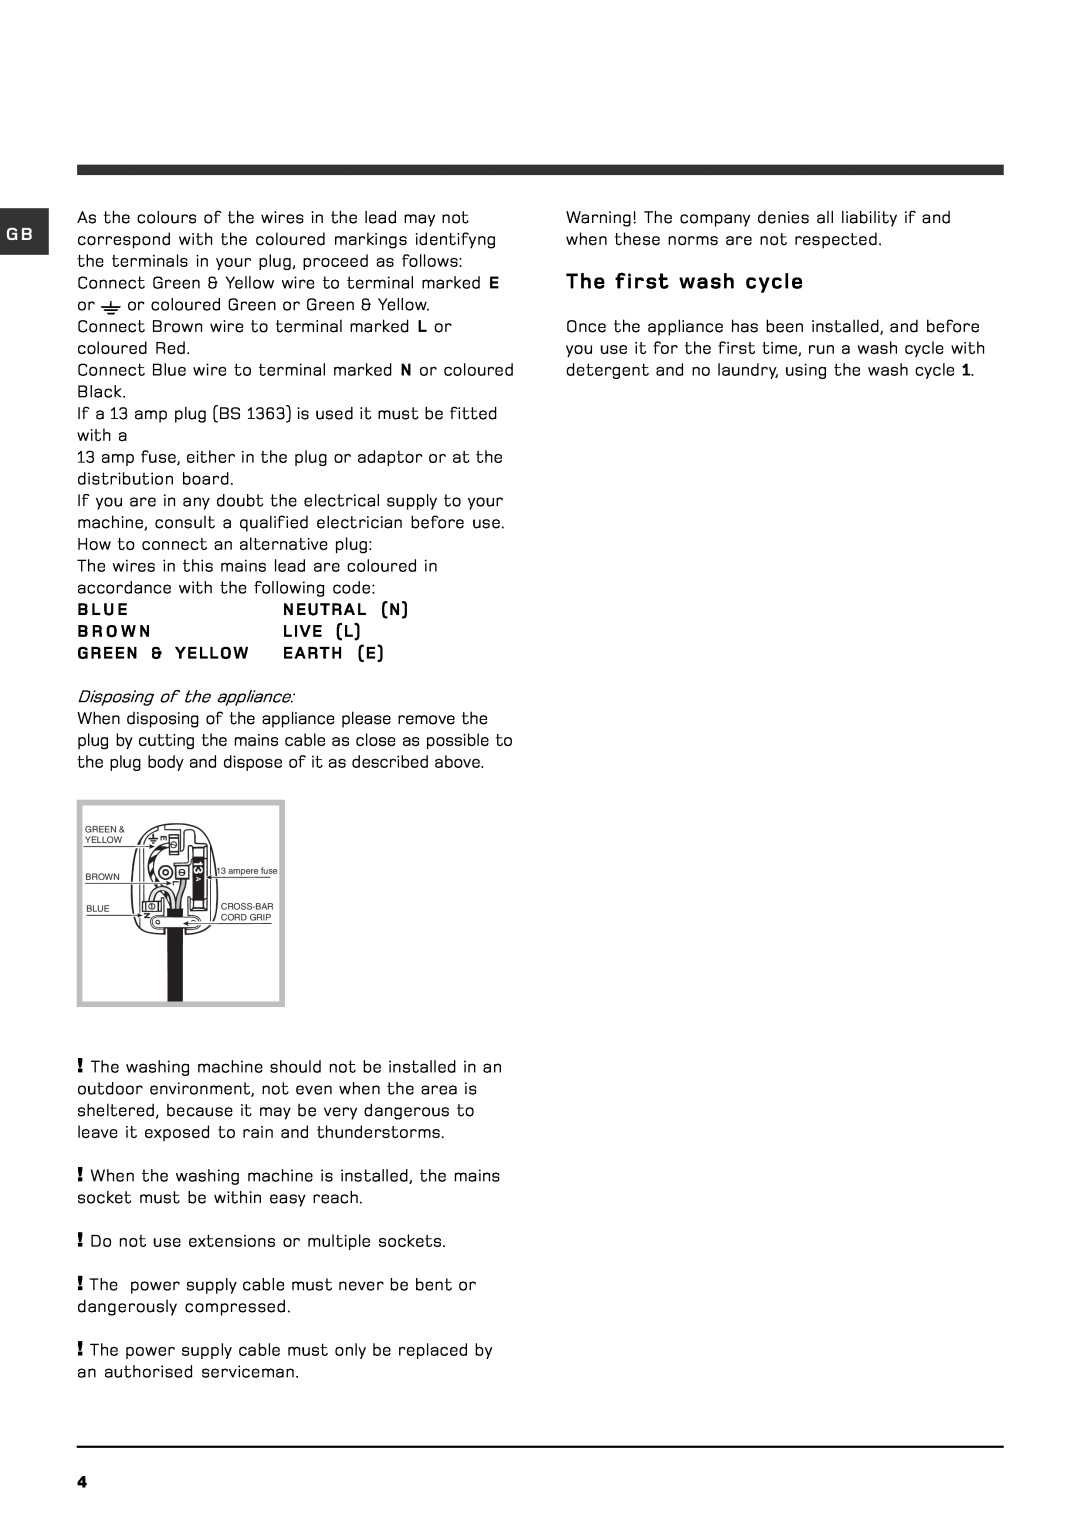 Hotpoint wml 520 manual The first wash cycle 